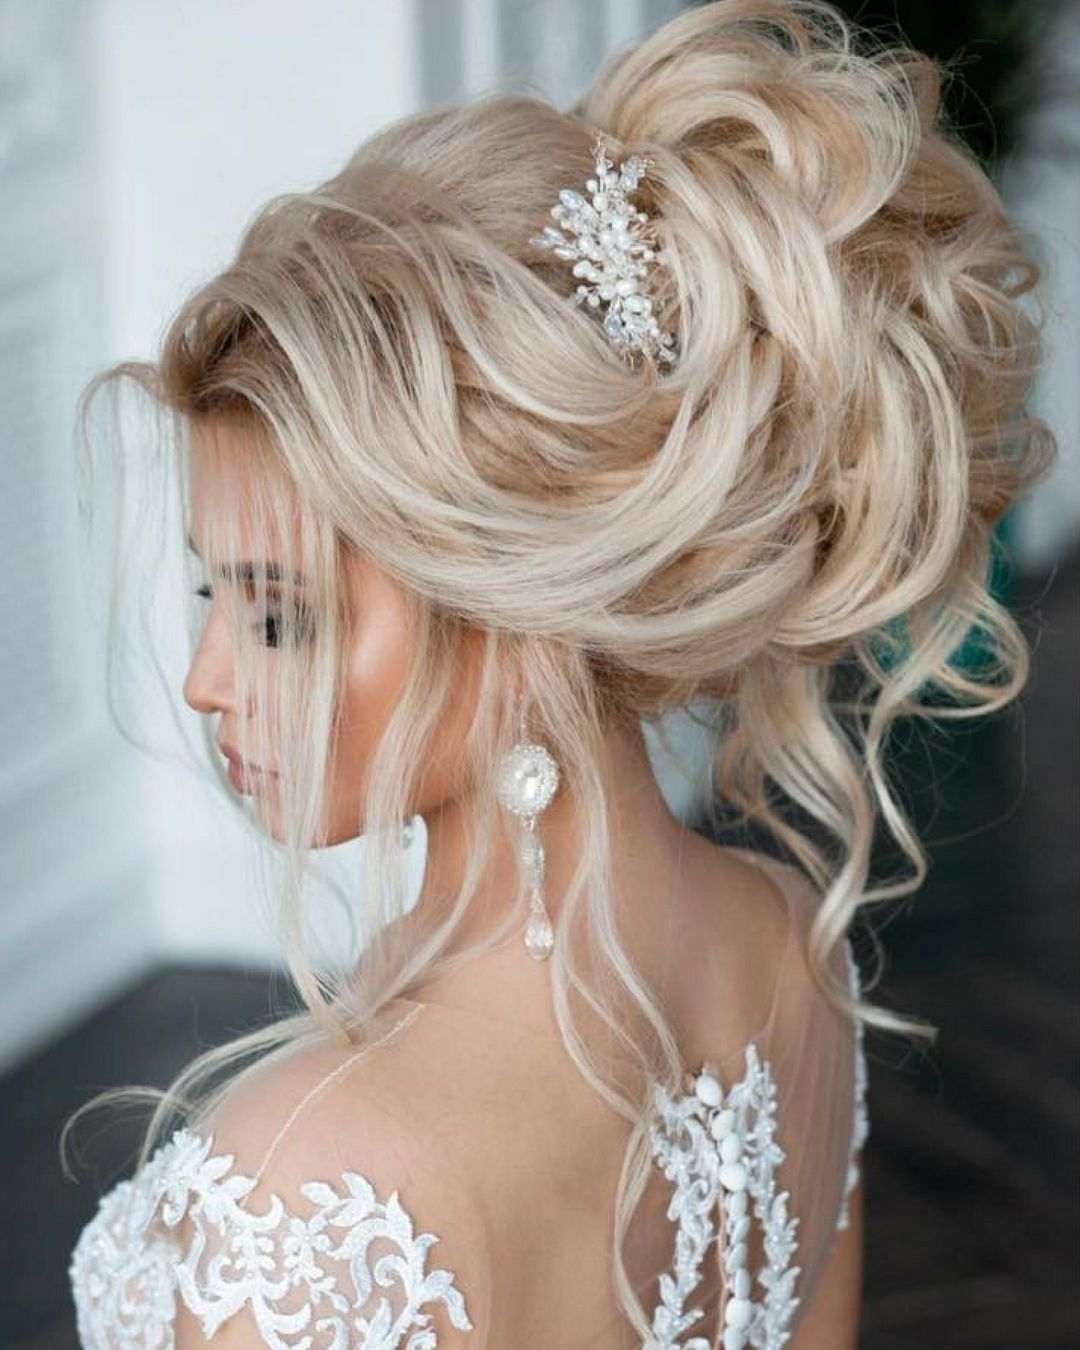 Beautifully Volume Updo And Elegant Hair Accessory (View 4 of 15)